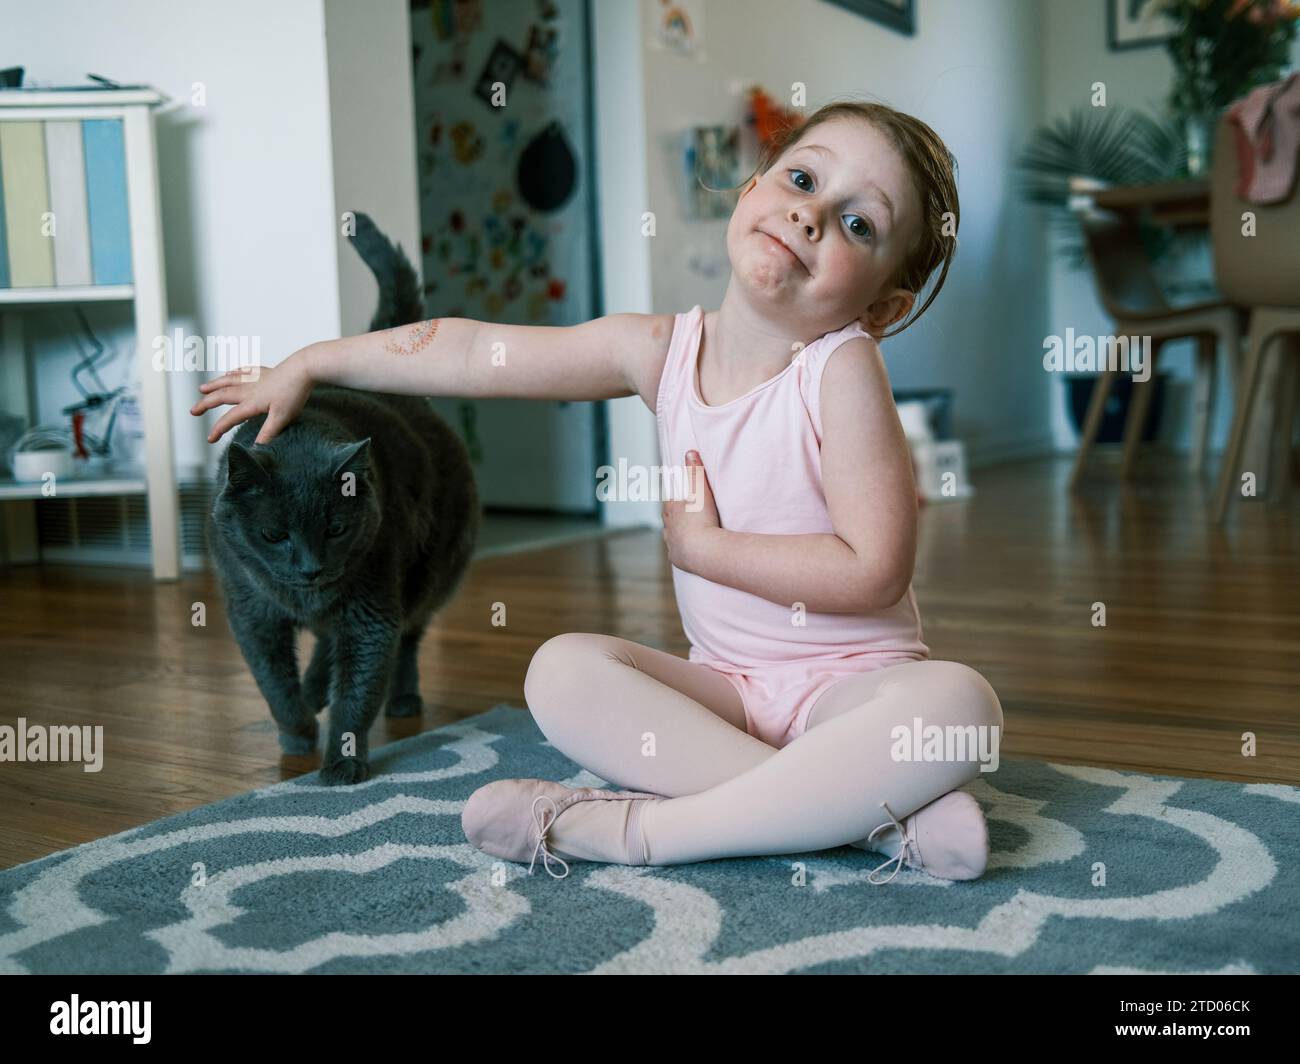 Happy toddler in ballet outfit petting a cat Stock Photo